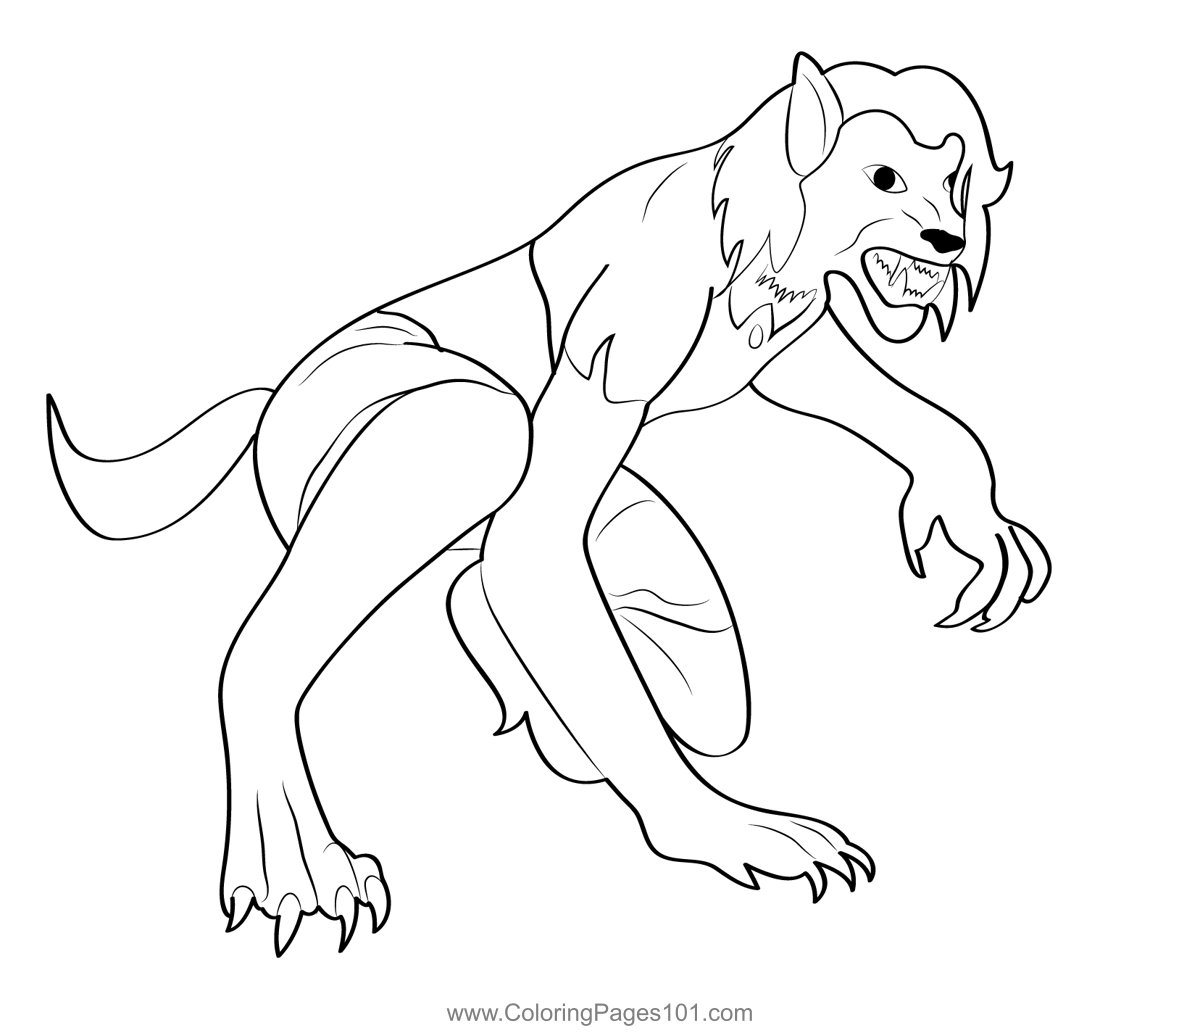 Werewolf9 Coloring Page for Kids - Free Werewolves Printable Coloring ...